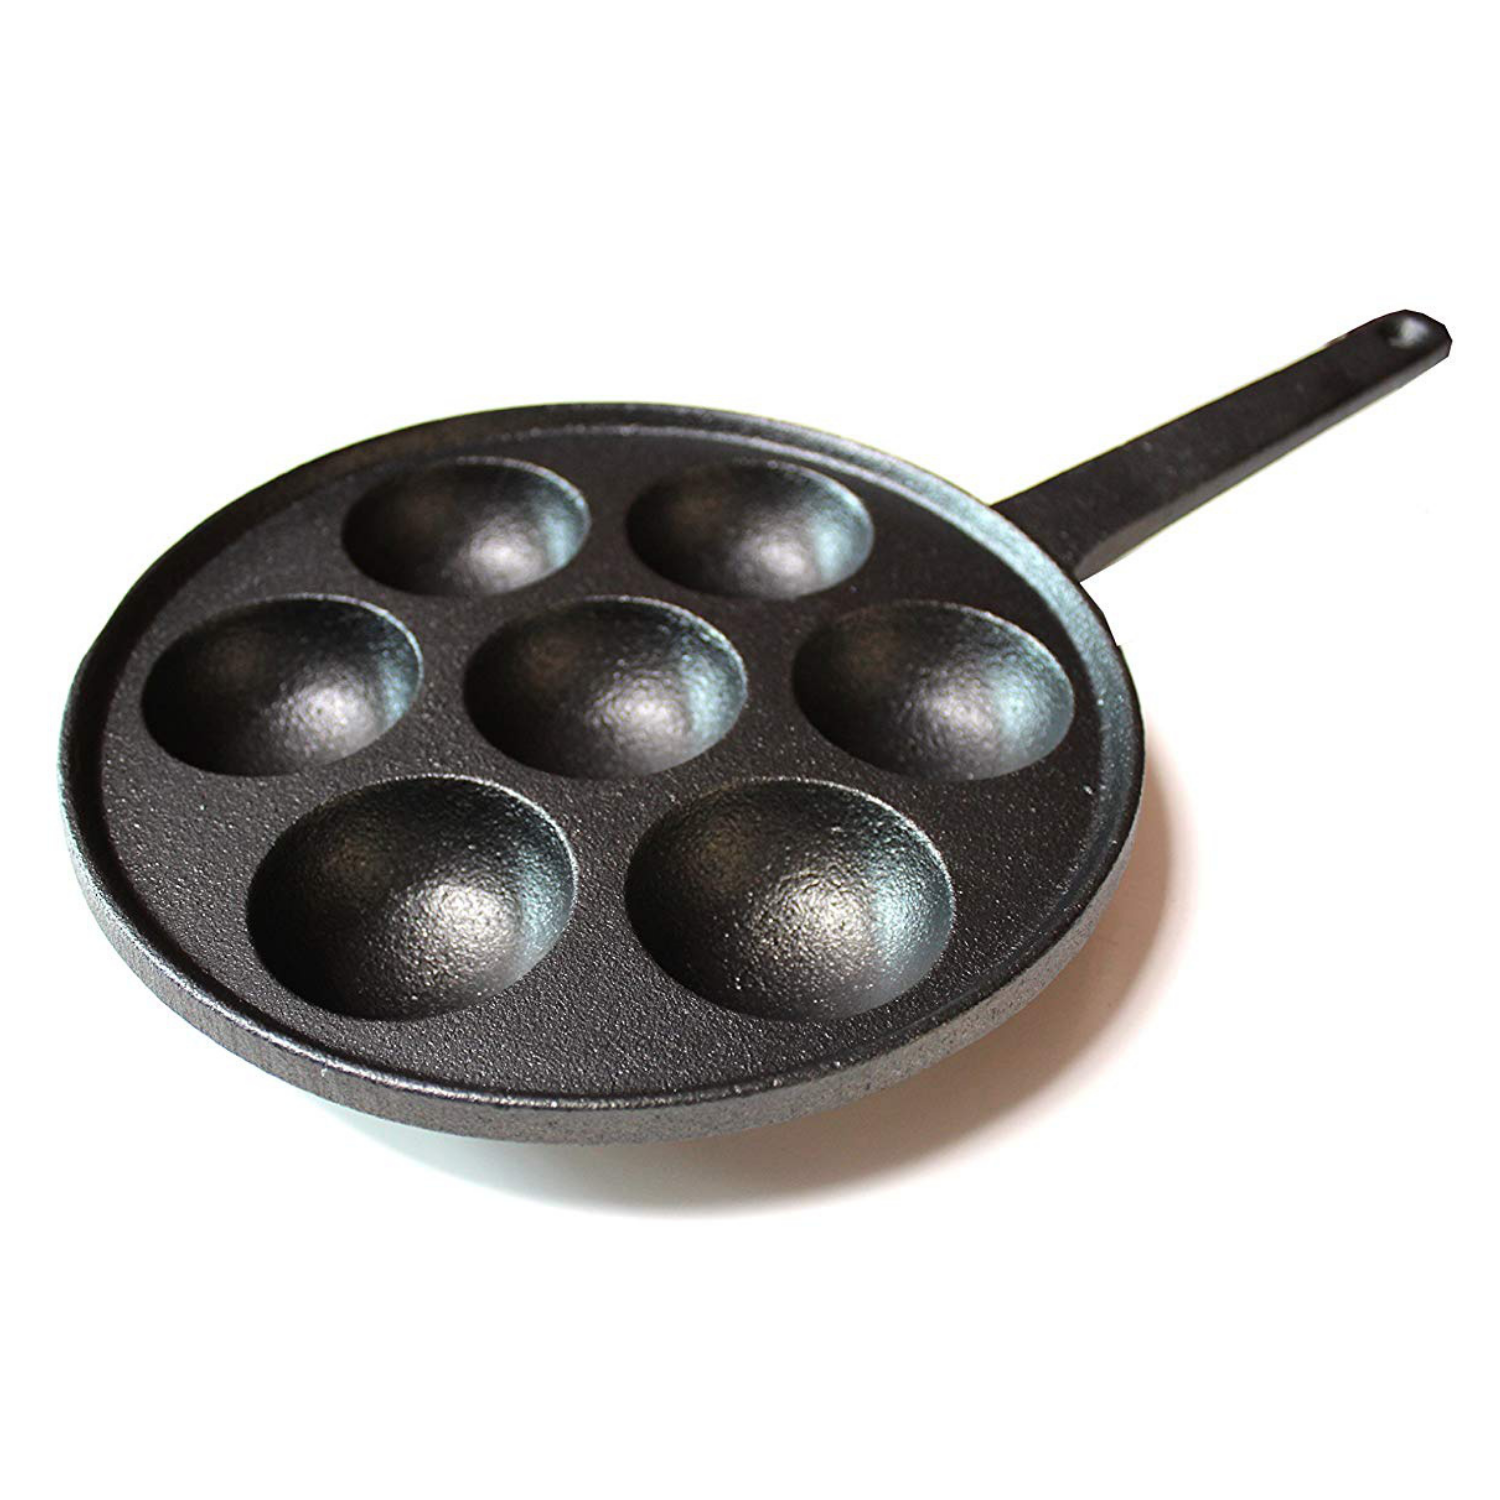 Iron Small Egg Pan Cast Iron Skillet Frying Pan with Dual Drip